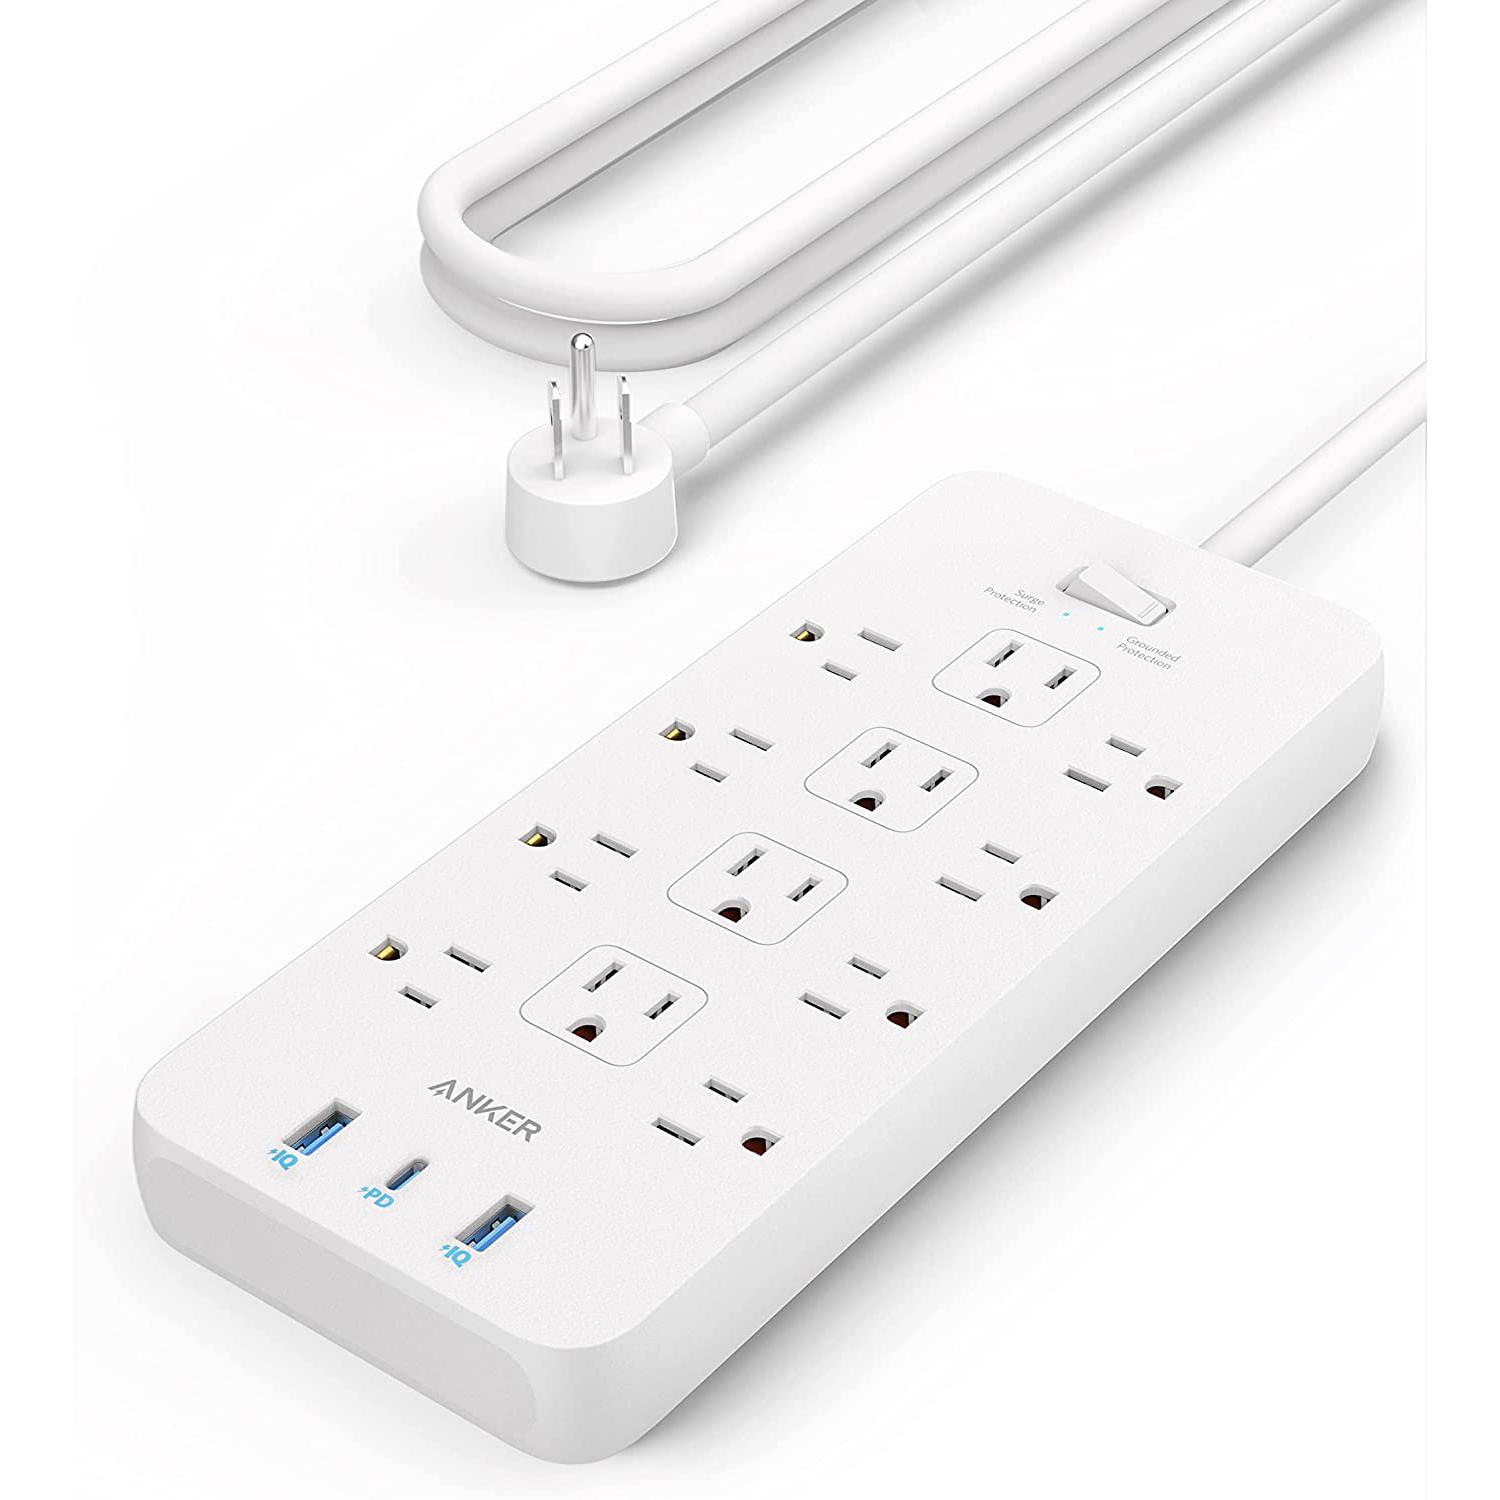 Anker Power Strip 2100J 12-Outlet and USB Surge Protector for $24.99 Shipped